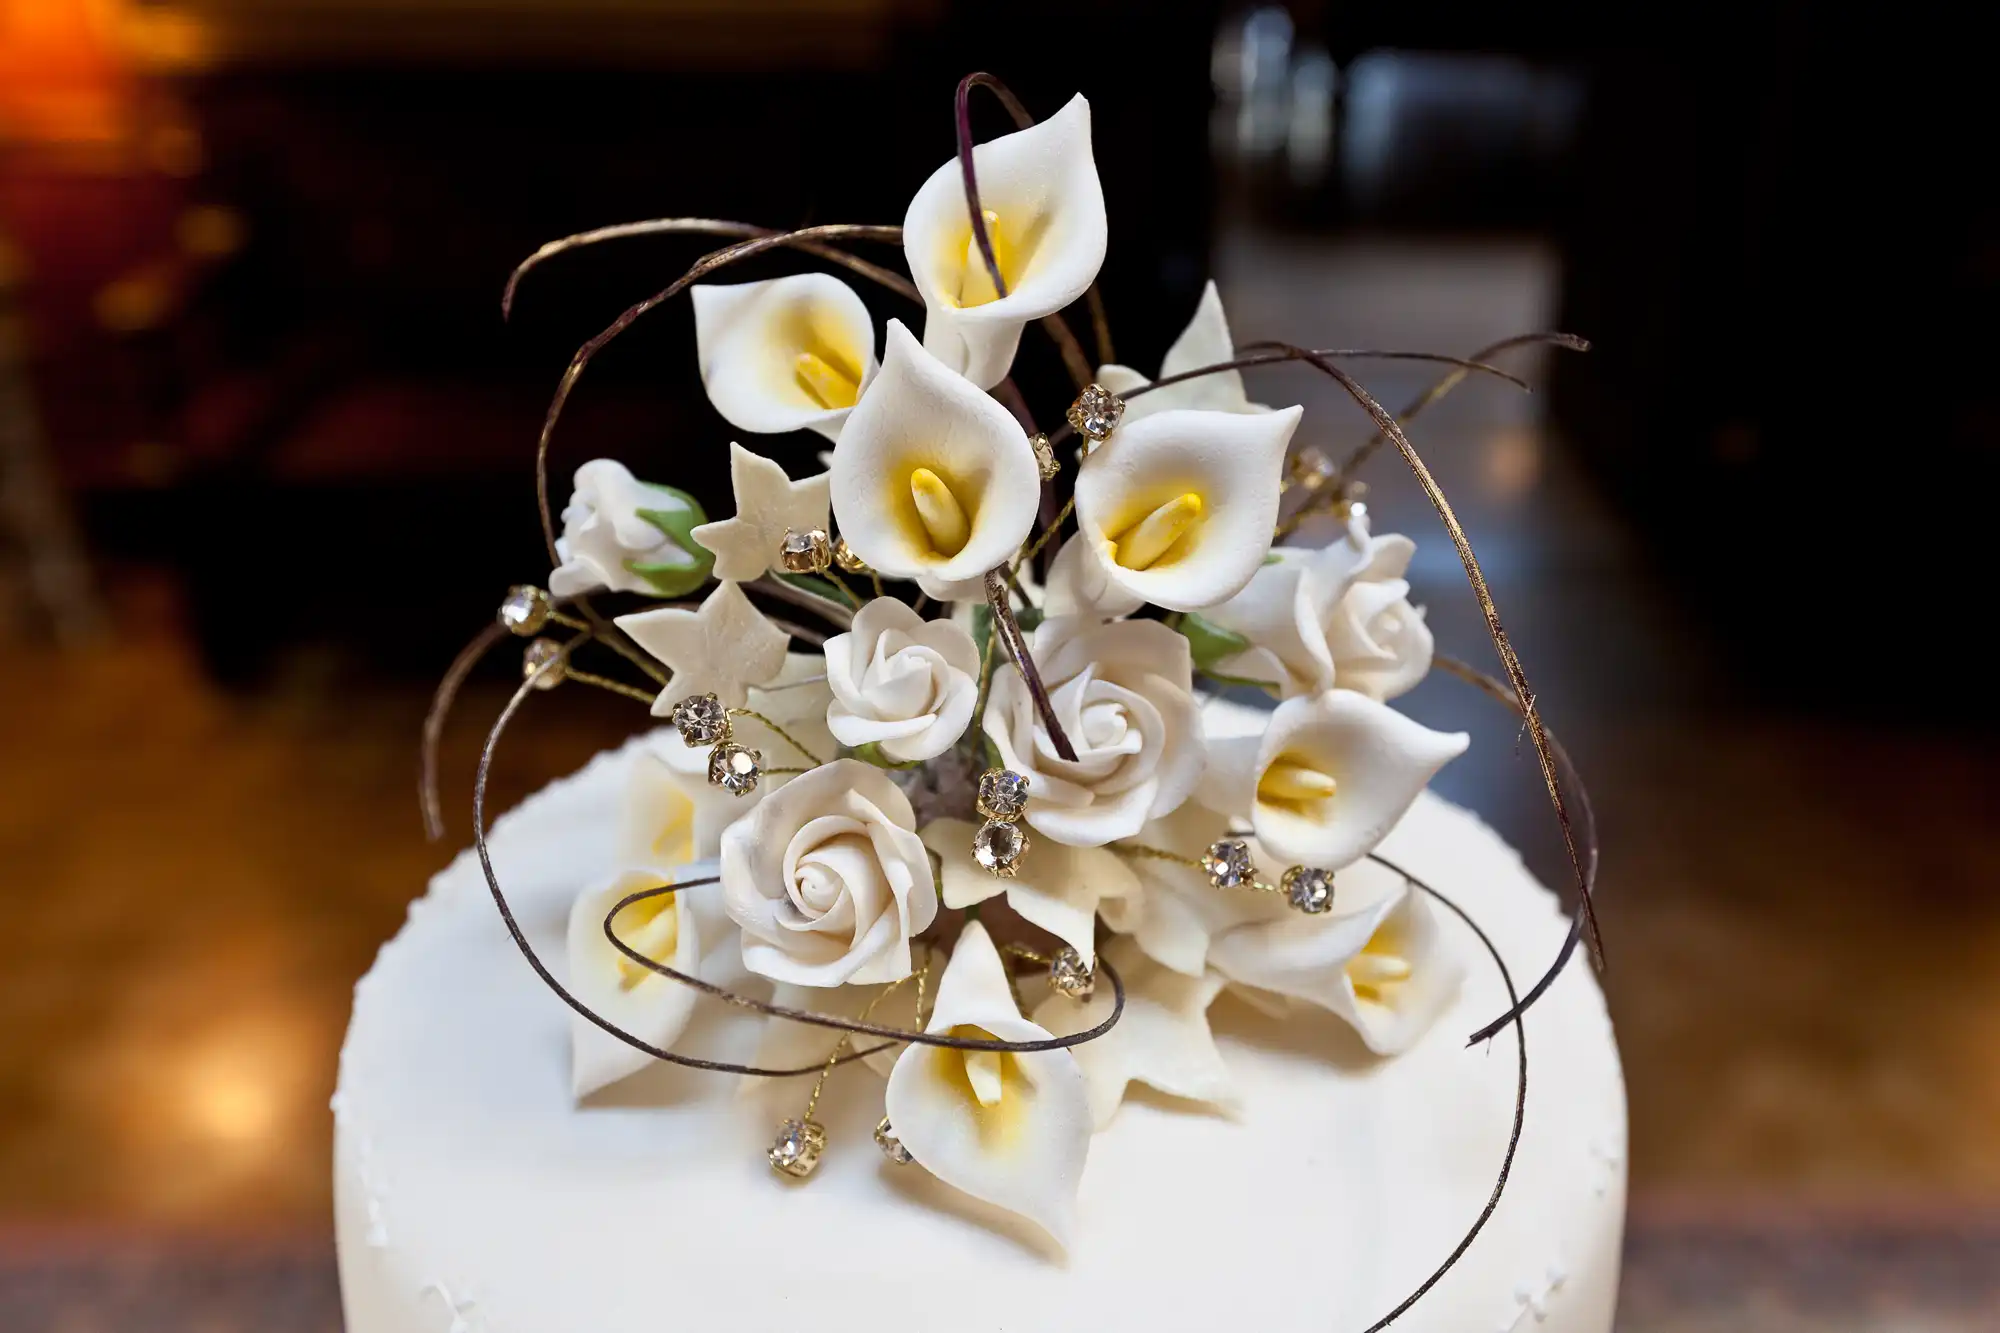 Elegant wedding cake topped with white calla lilies and roses, accented with delicate crystals and swirling dark branches.